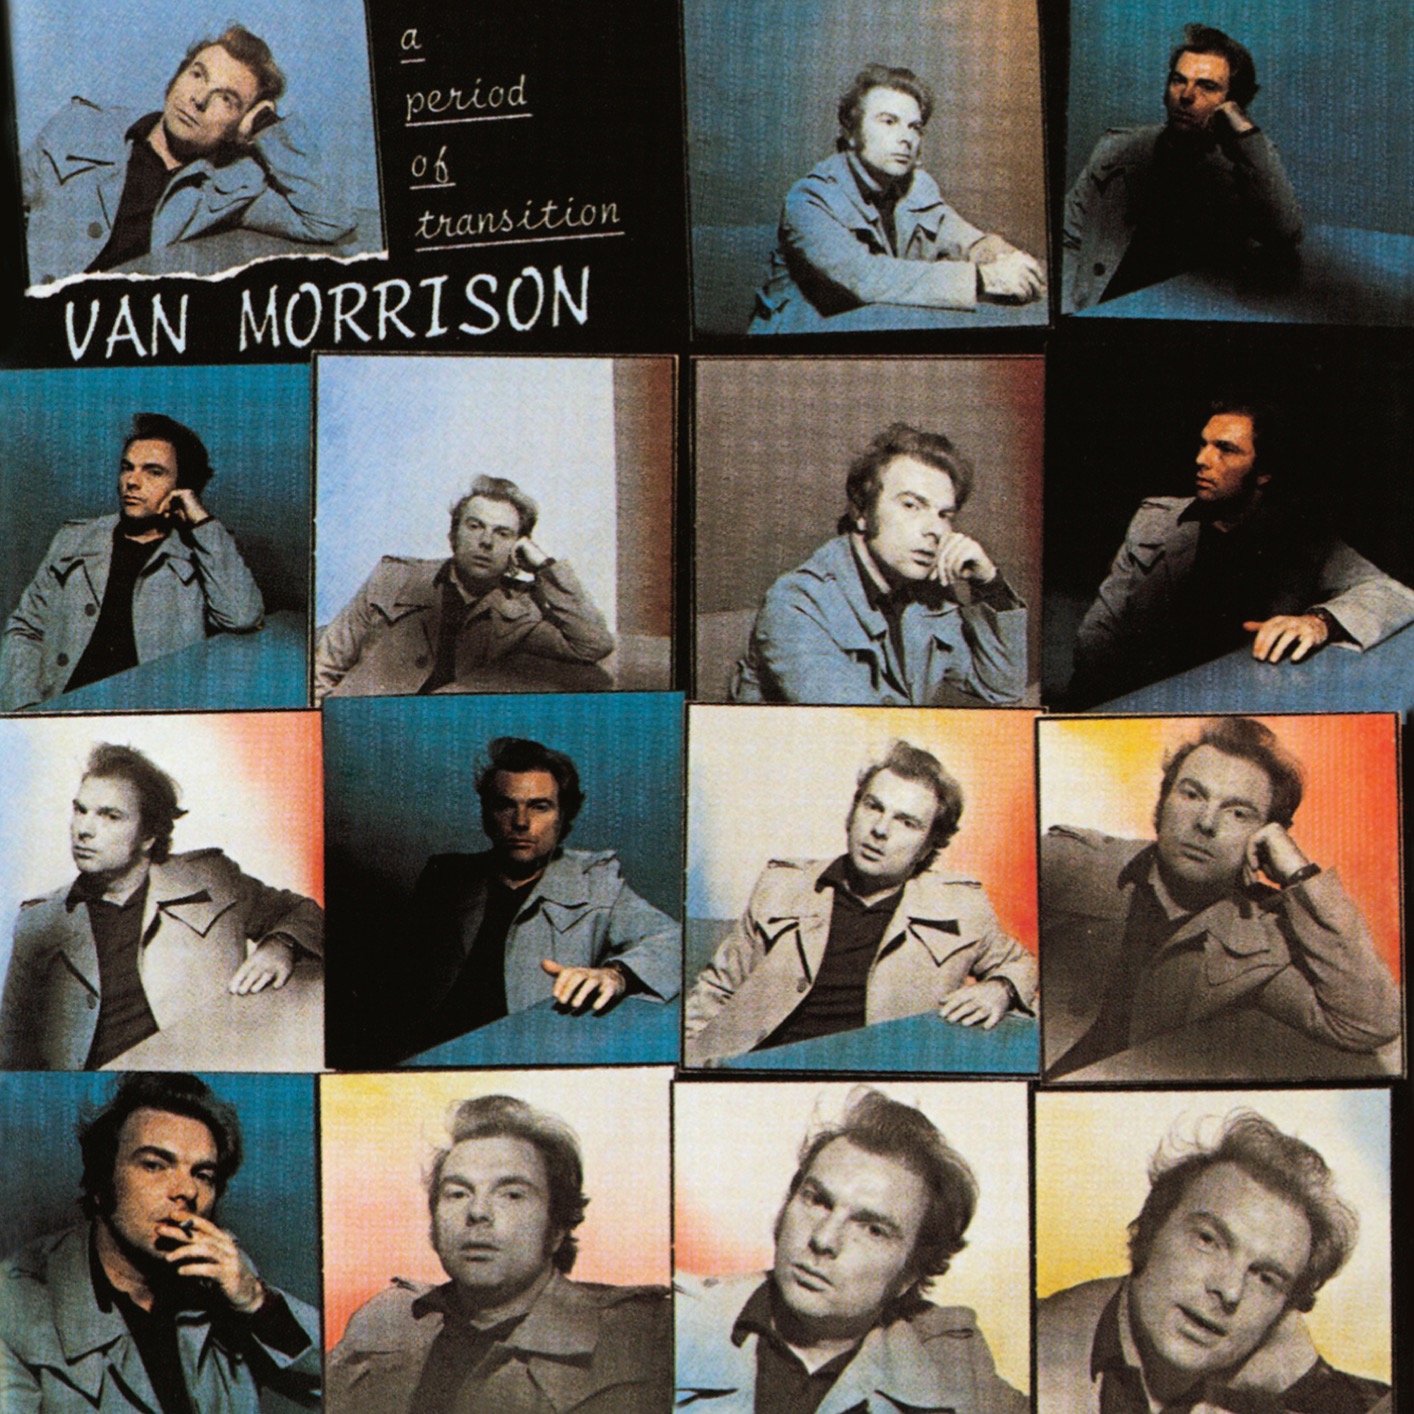 Van Morrison - A Period of Transition (Remastered) (1977/2020) [FLAC 24bit/96kHz]